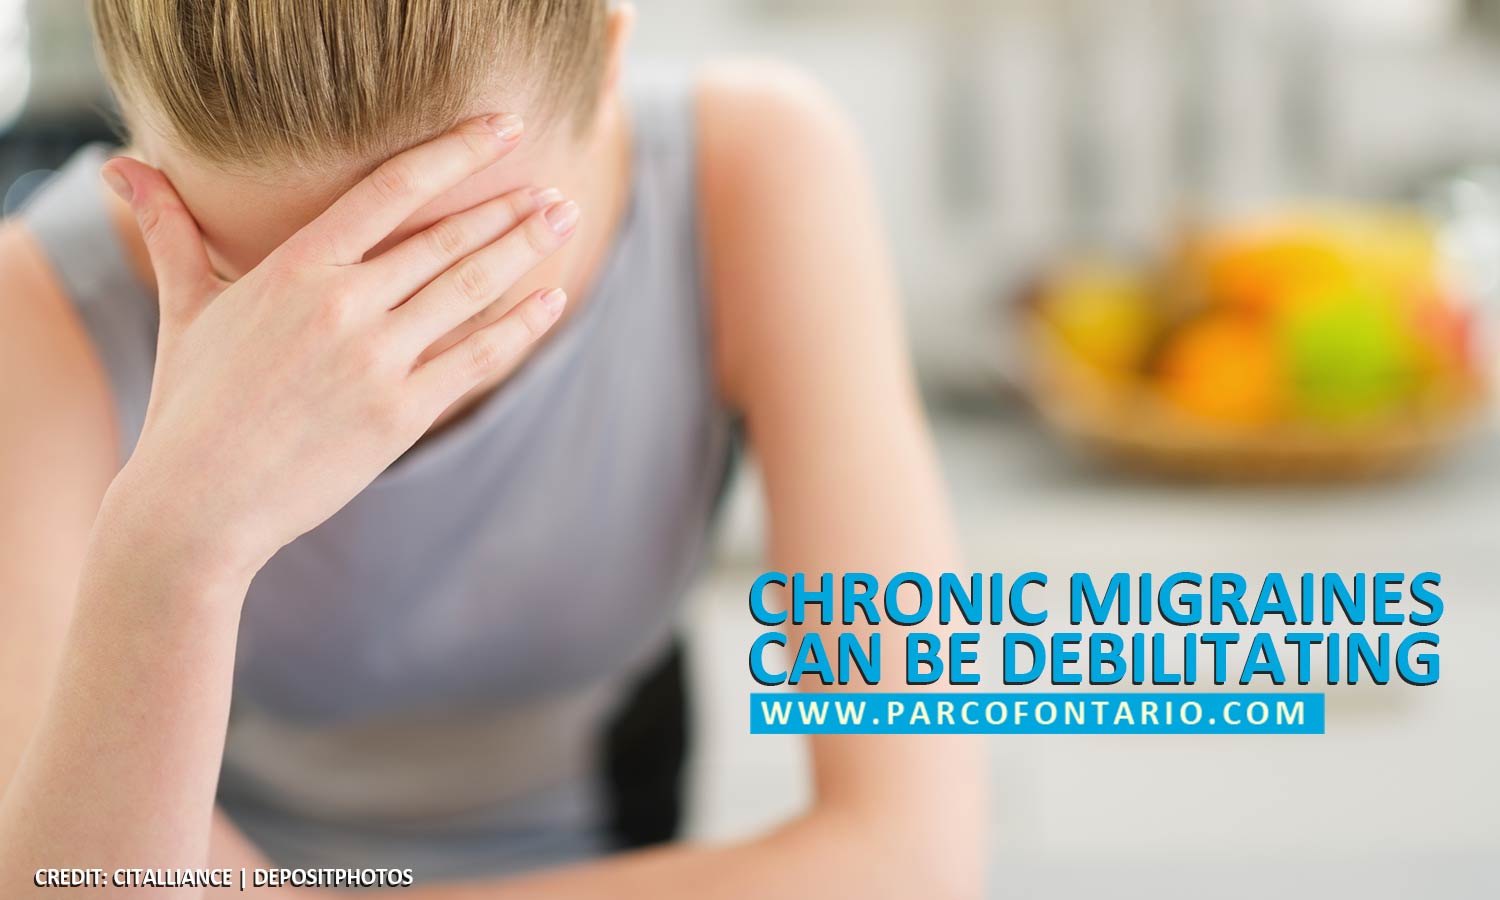 Chronic migraines can be debilitating